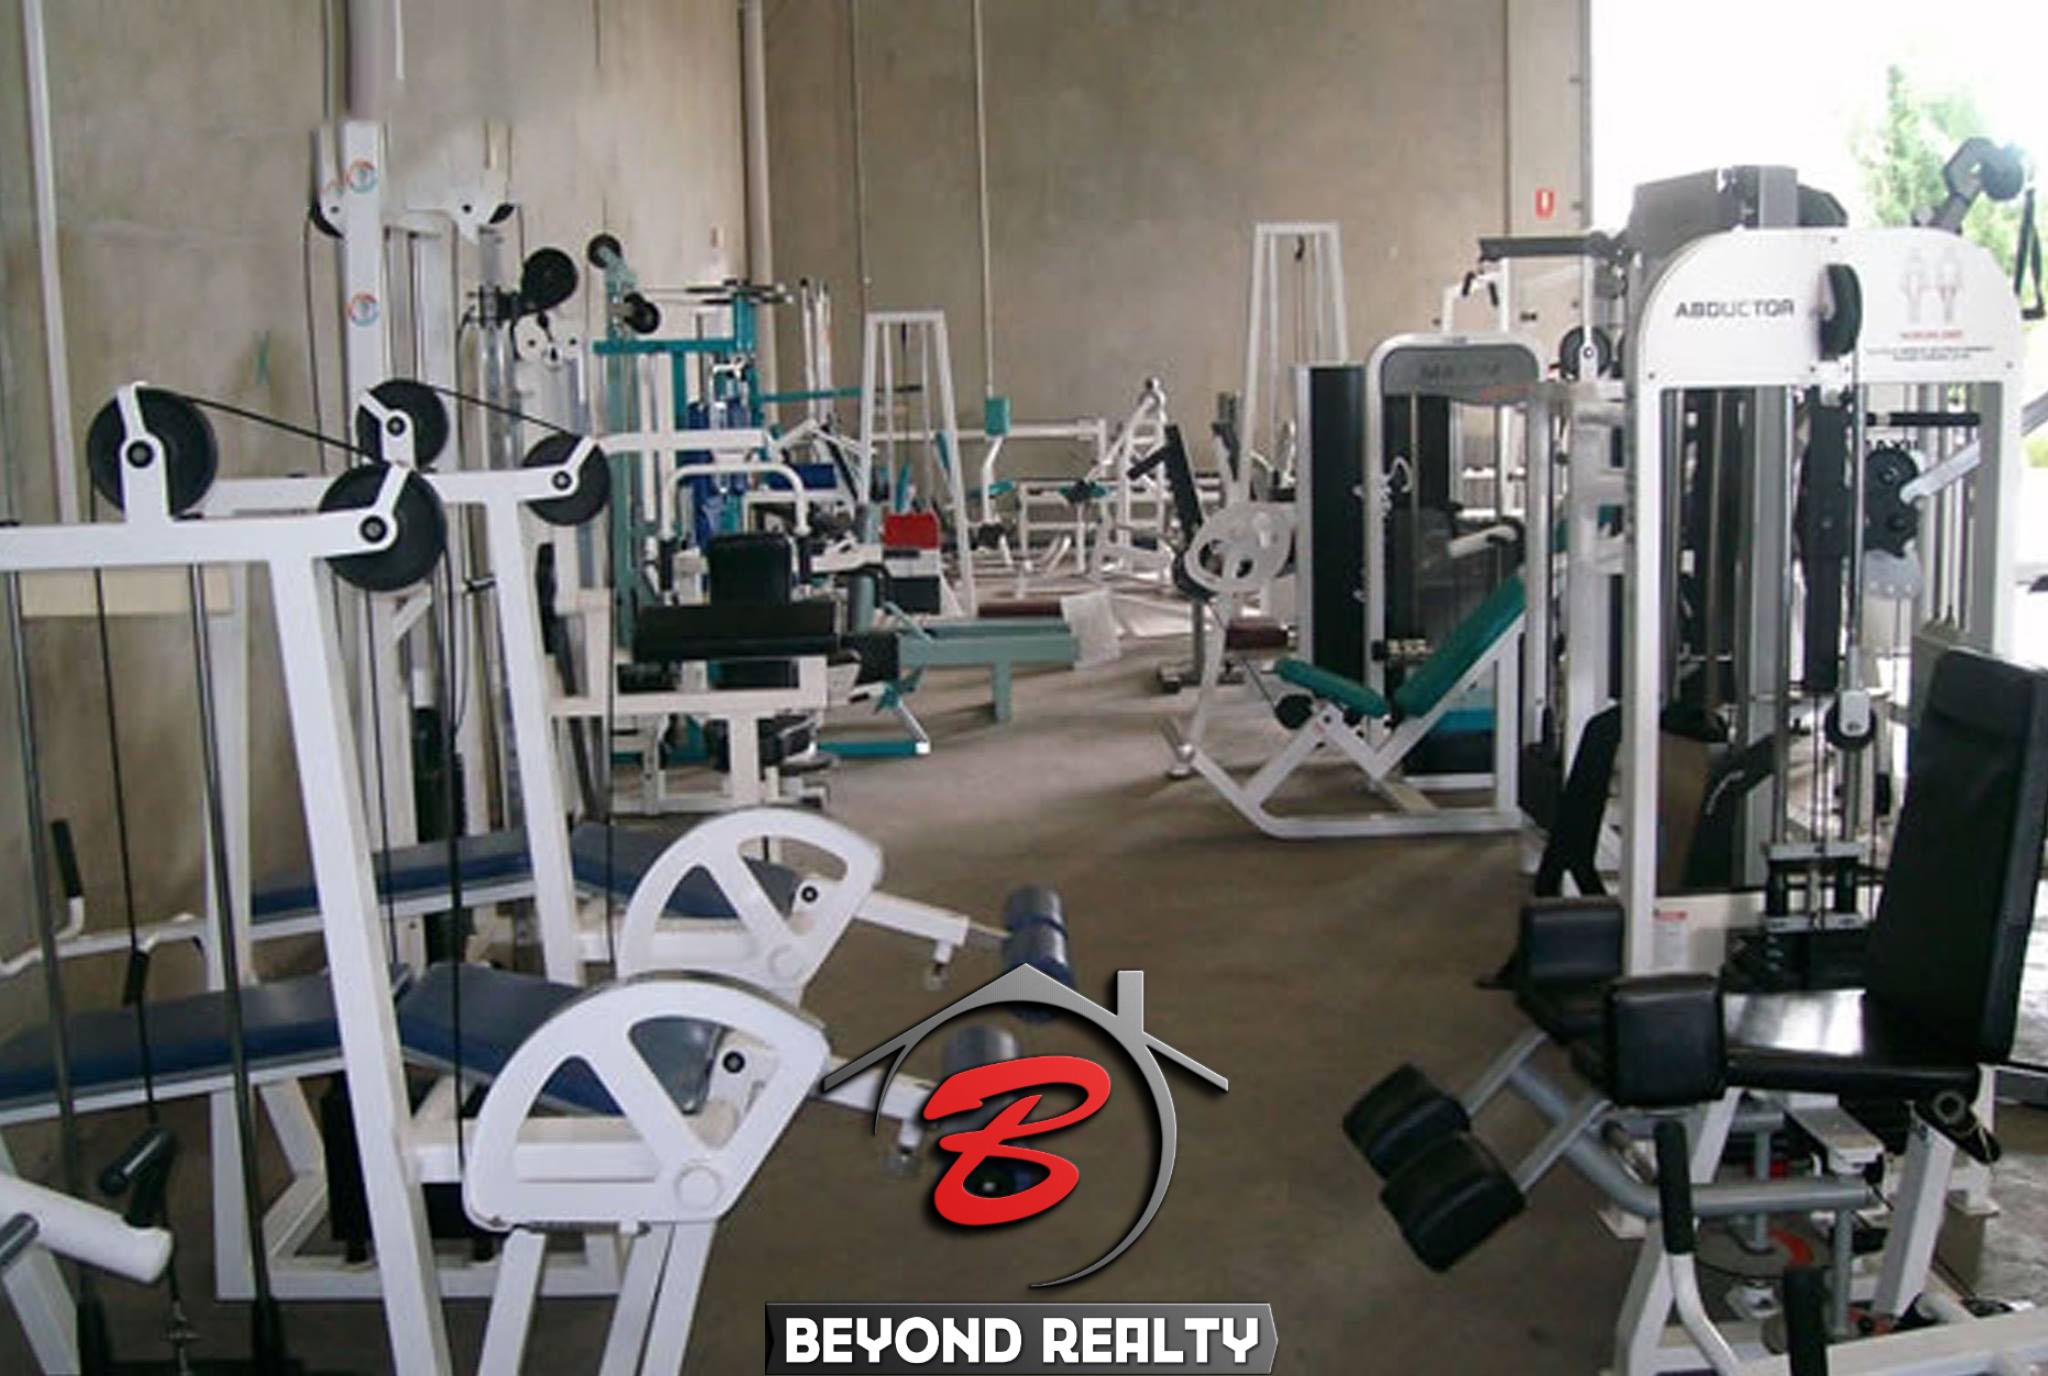 the gym of the serviced apartment for rent in Phnom Penh Cambodia